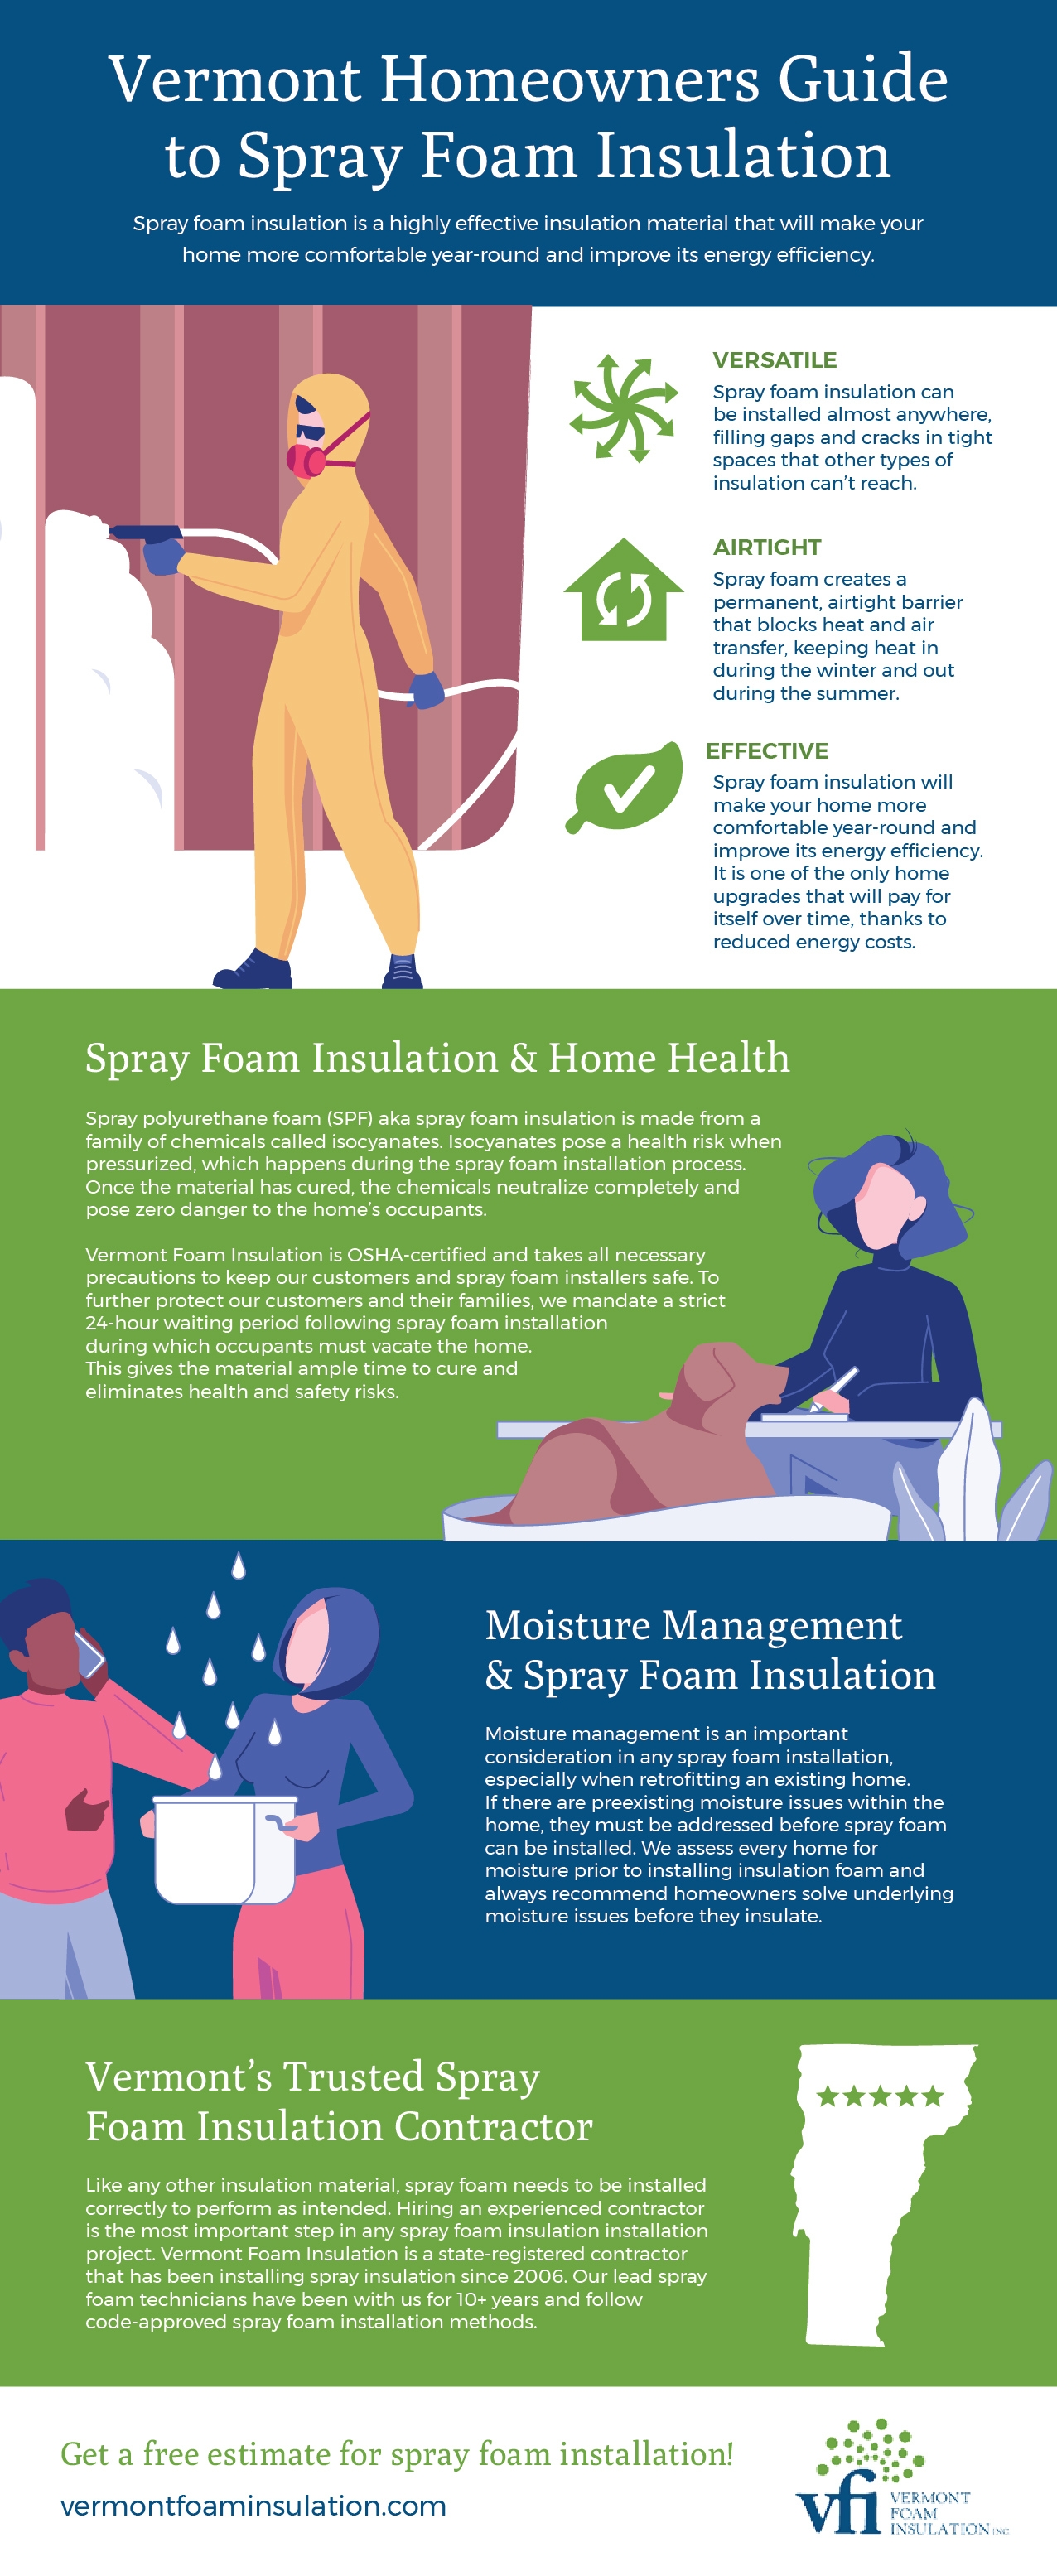 Vermont Homeowners Guide to Spray Foam Insulation infographic